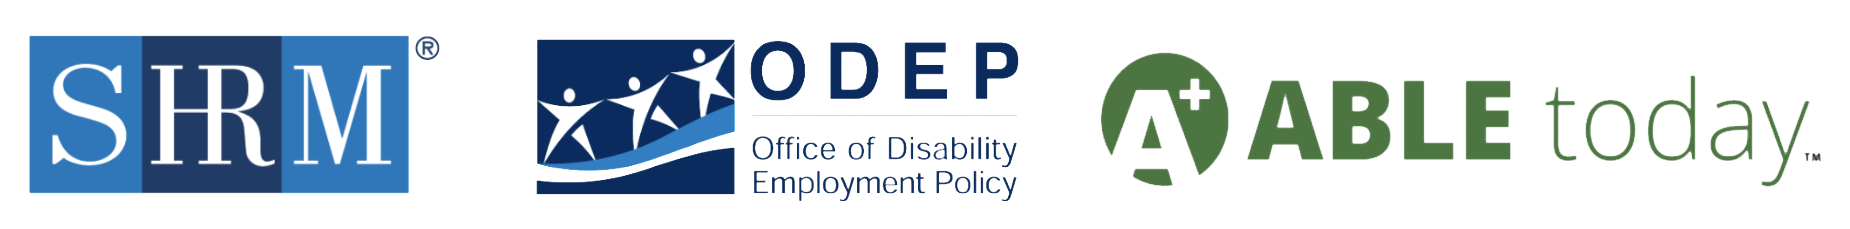 Society for Human Resources Management (SHRM), U.S. Department of Labor’s Office of Disability Employment Policy (ODEP), and Able Today logos